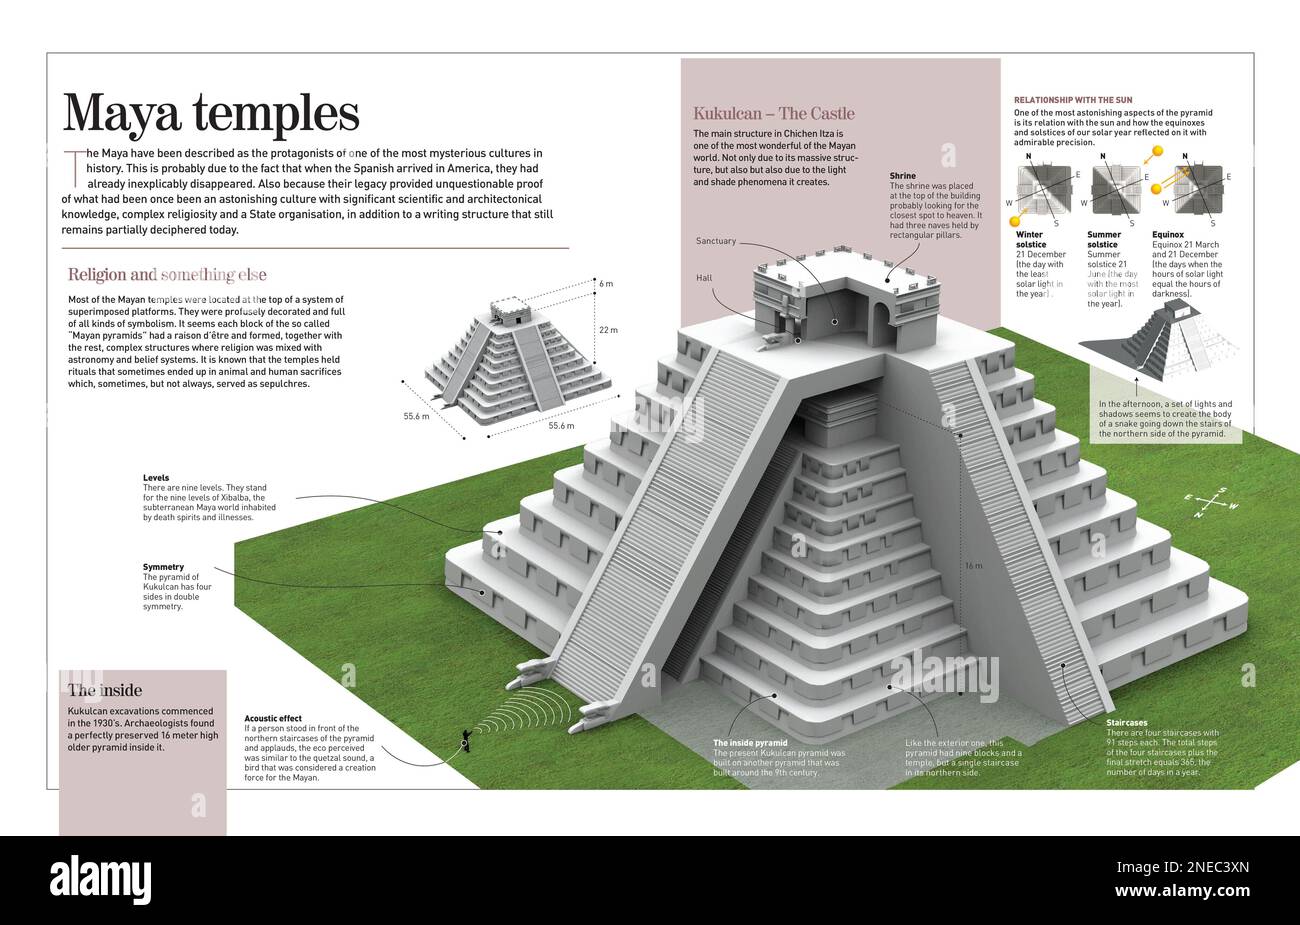 Infographic about Maya temples, with a special focus on the pyramid-temple of Kukulcan 'The Castle”, built in the 12th century in the ancient city of Chichen Itza. [Adobe InDesign (.indd); 4960x3188]. Stock Photo